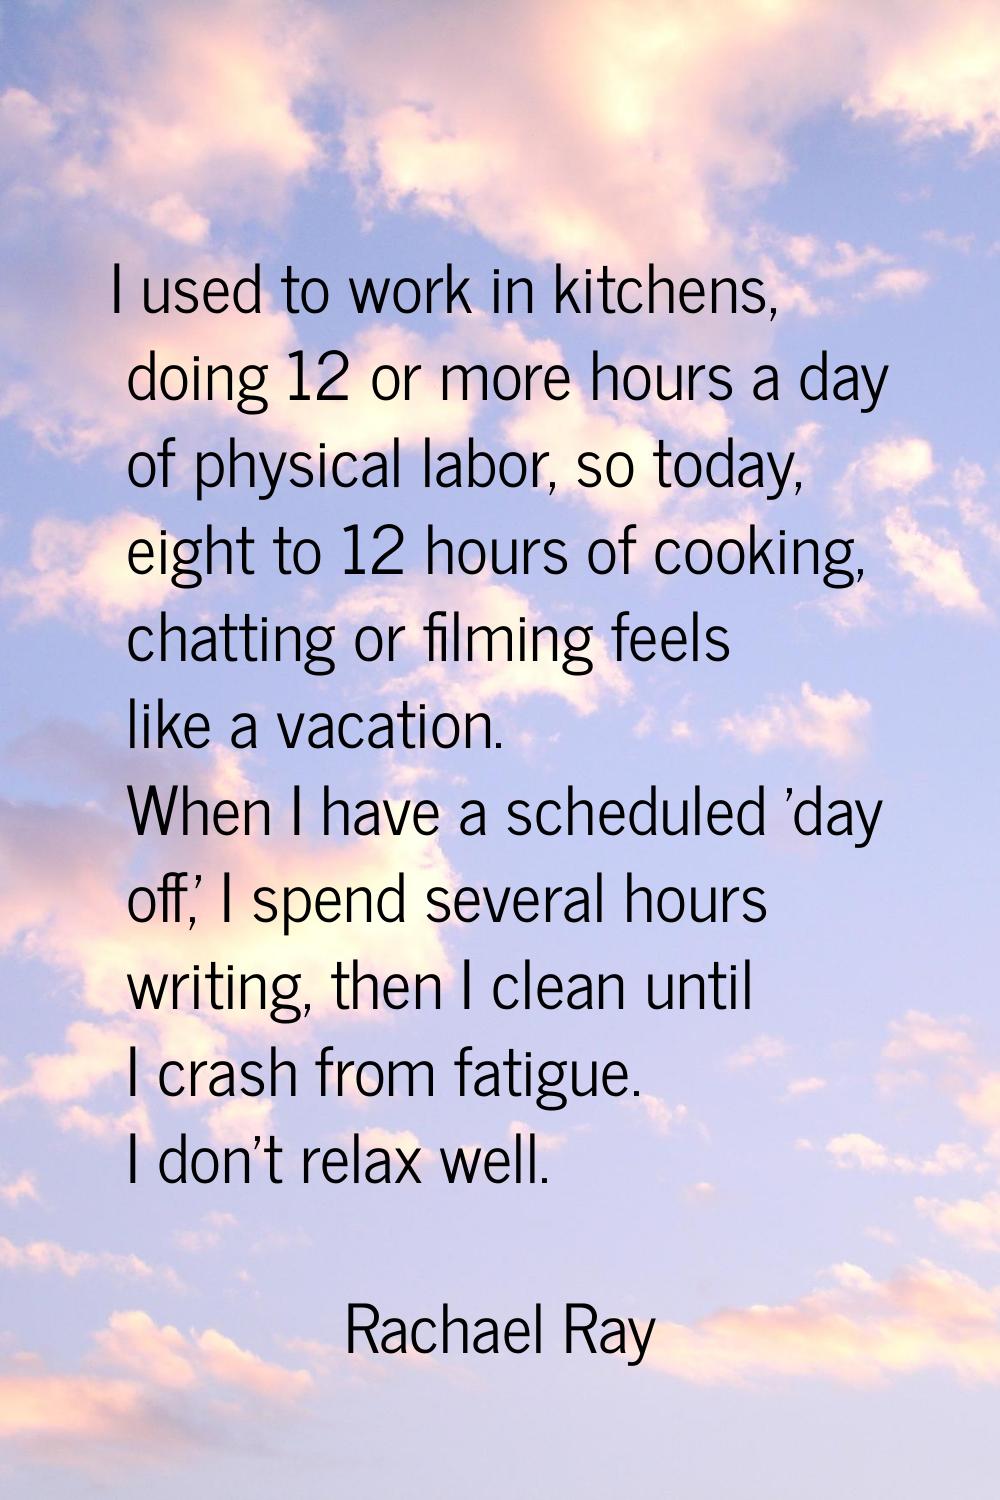 I used to work in kitchens, doing 12 or more hours a day of physical labor, so today, eight to 12 h